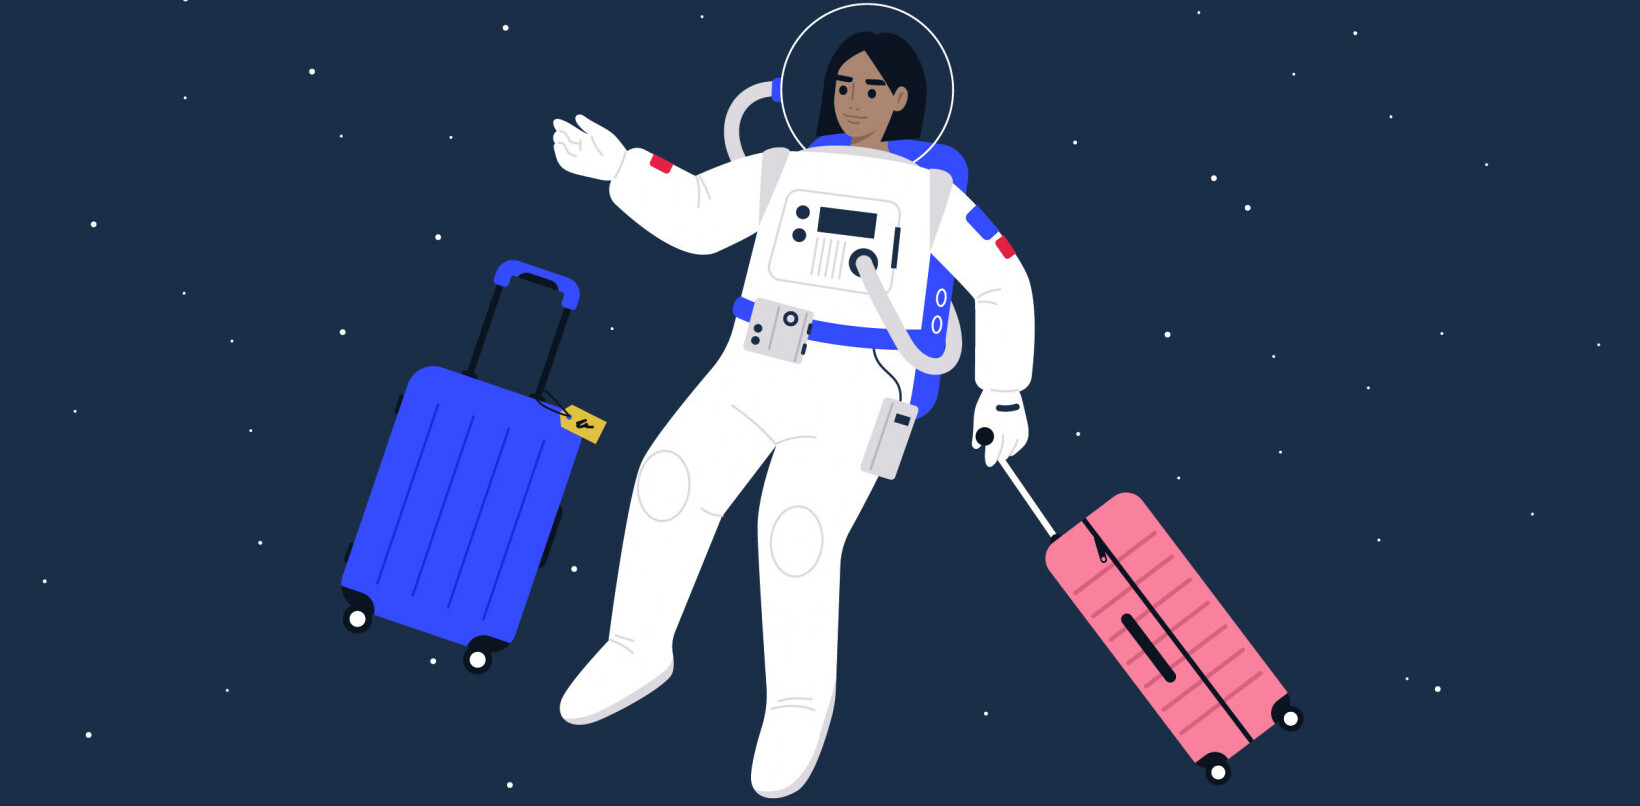 Space tourism is now a reality… if you’re filthy rich